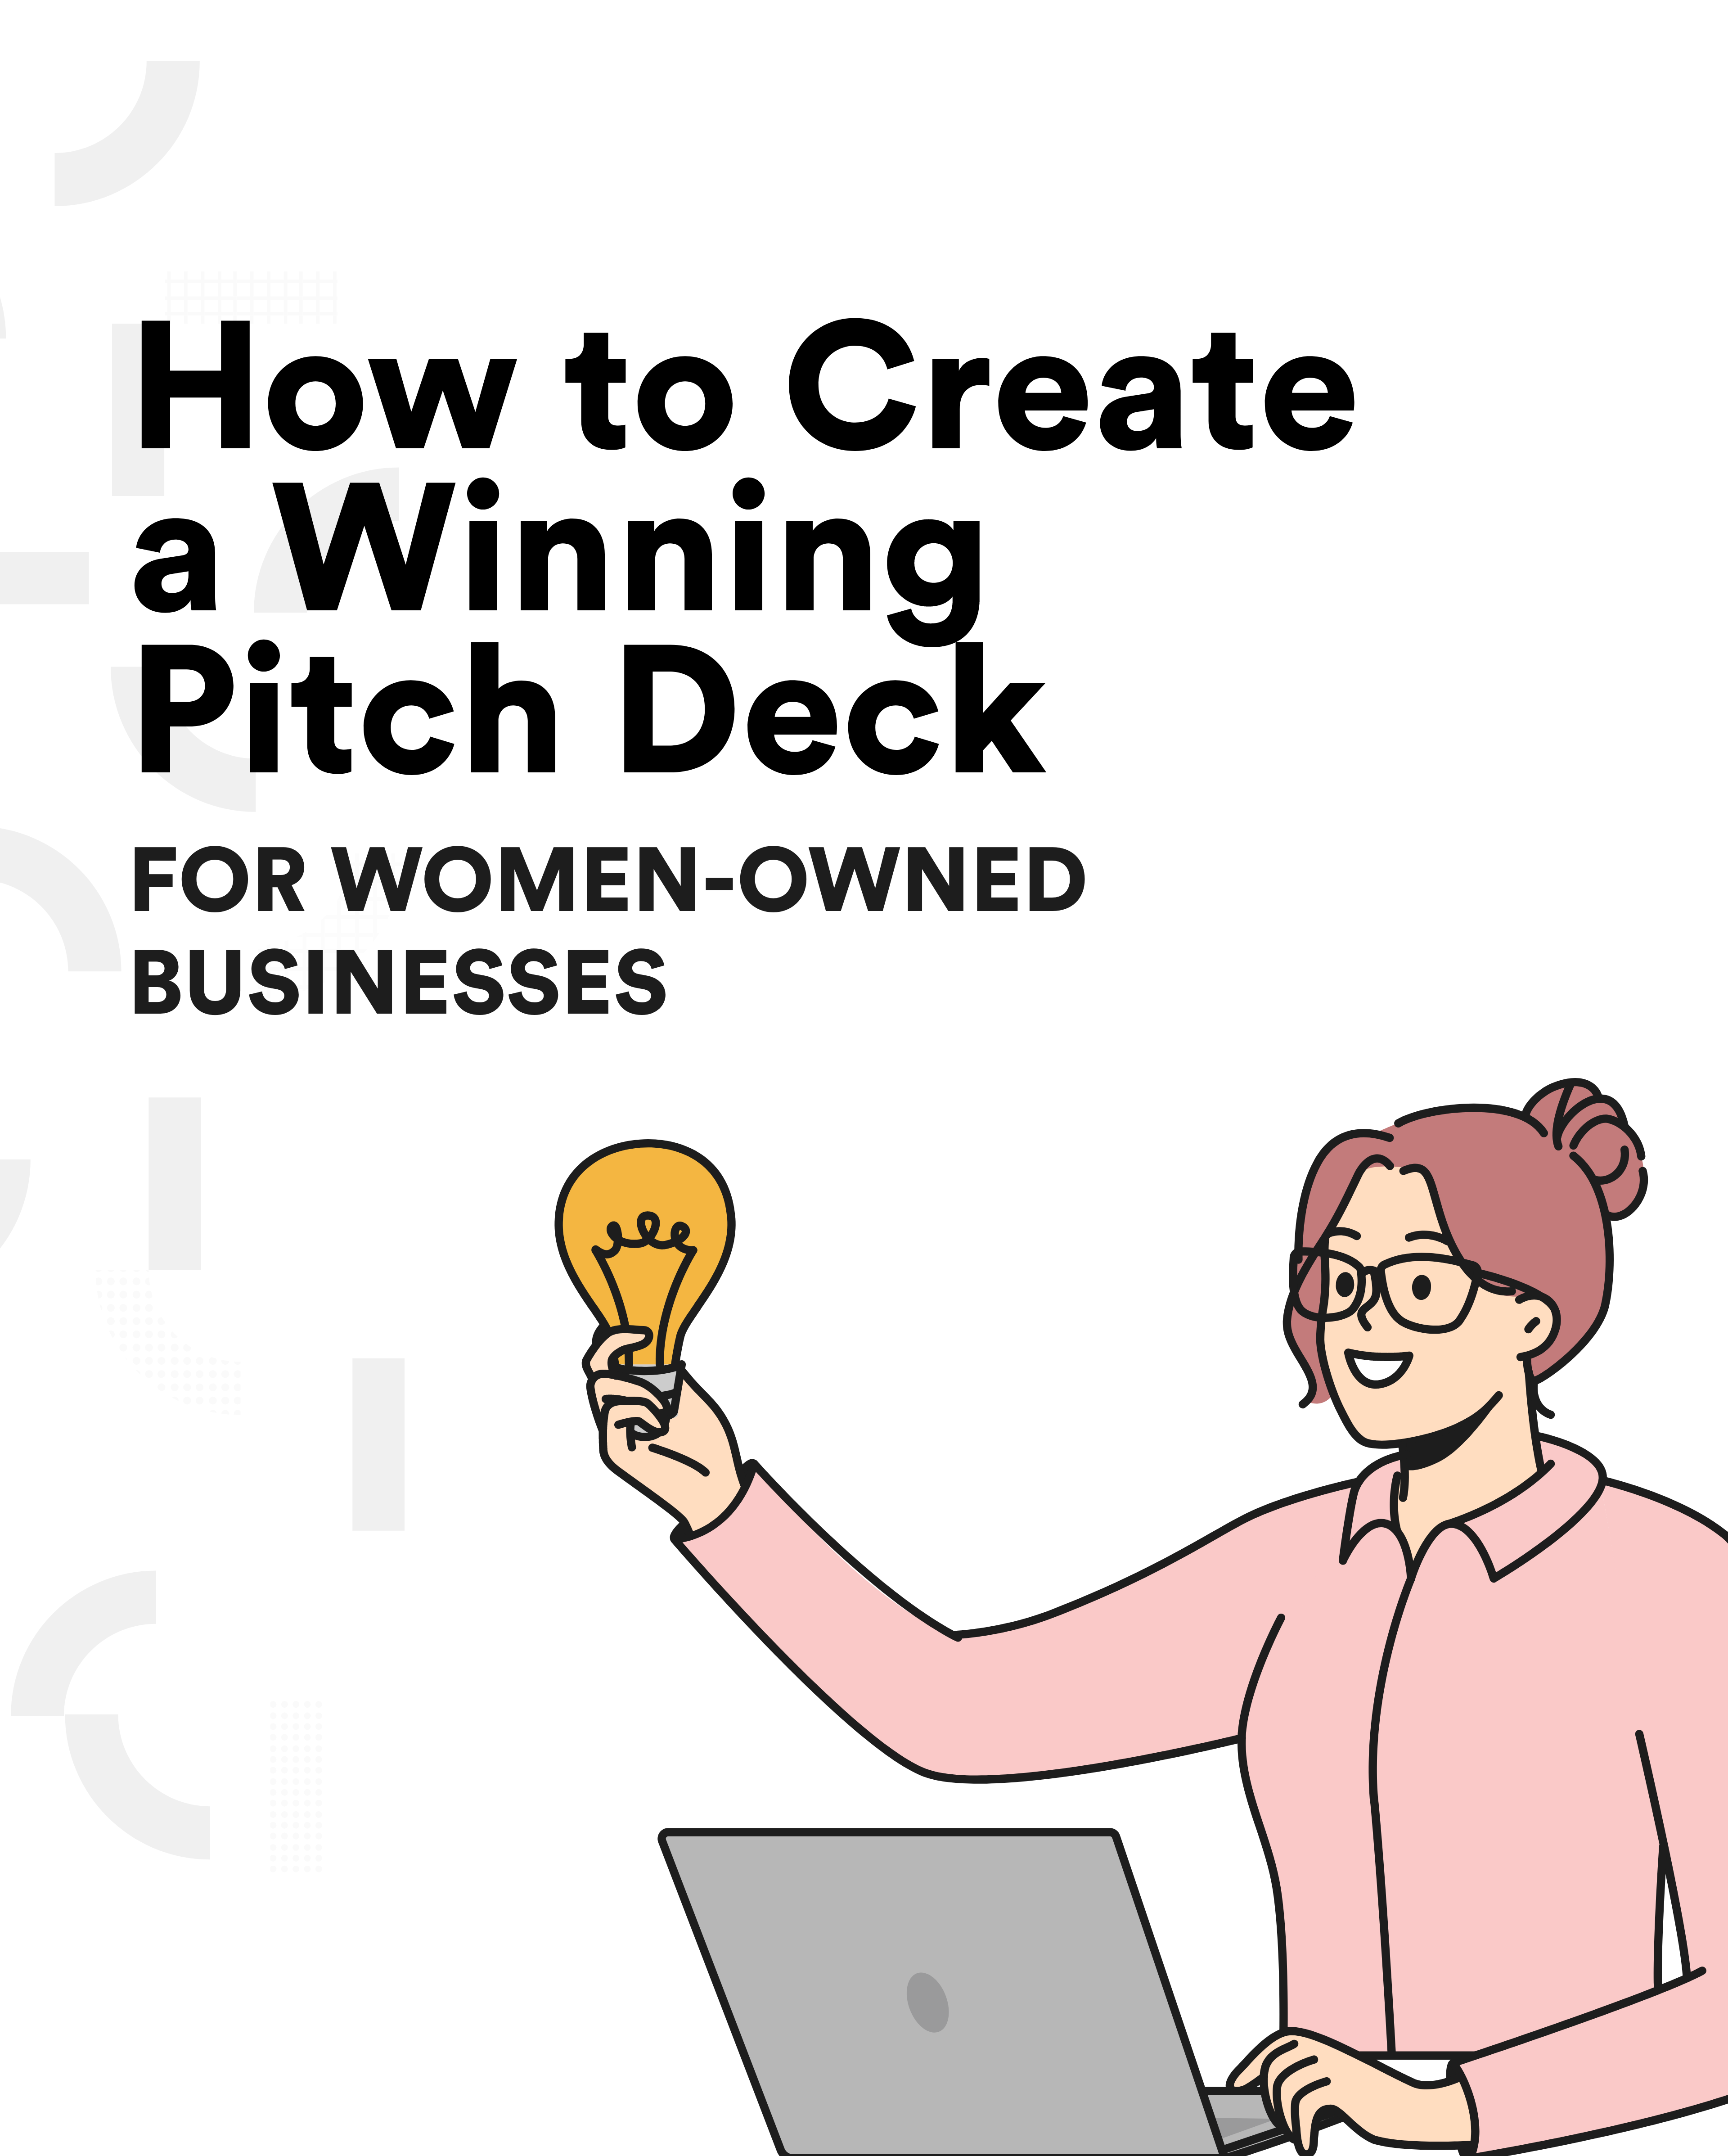 How to create a winning pitch deck for women owned business, or pitch deck for female founders, in 5 steps